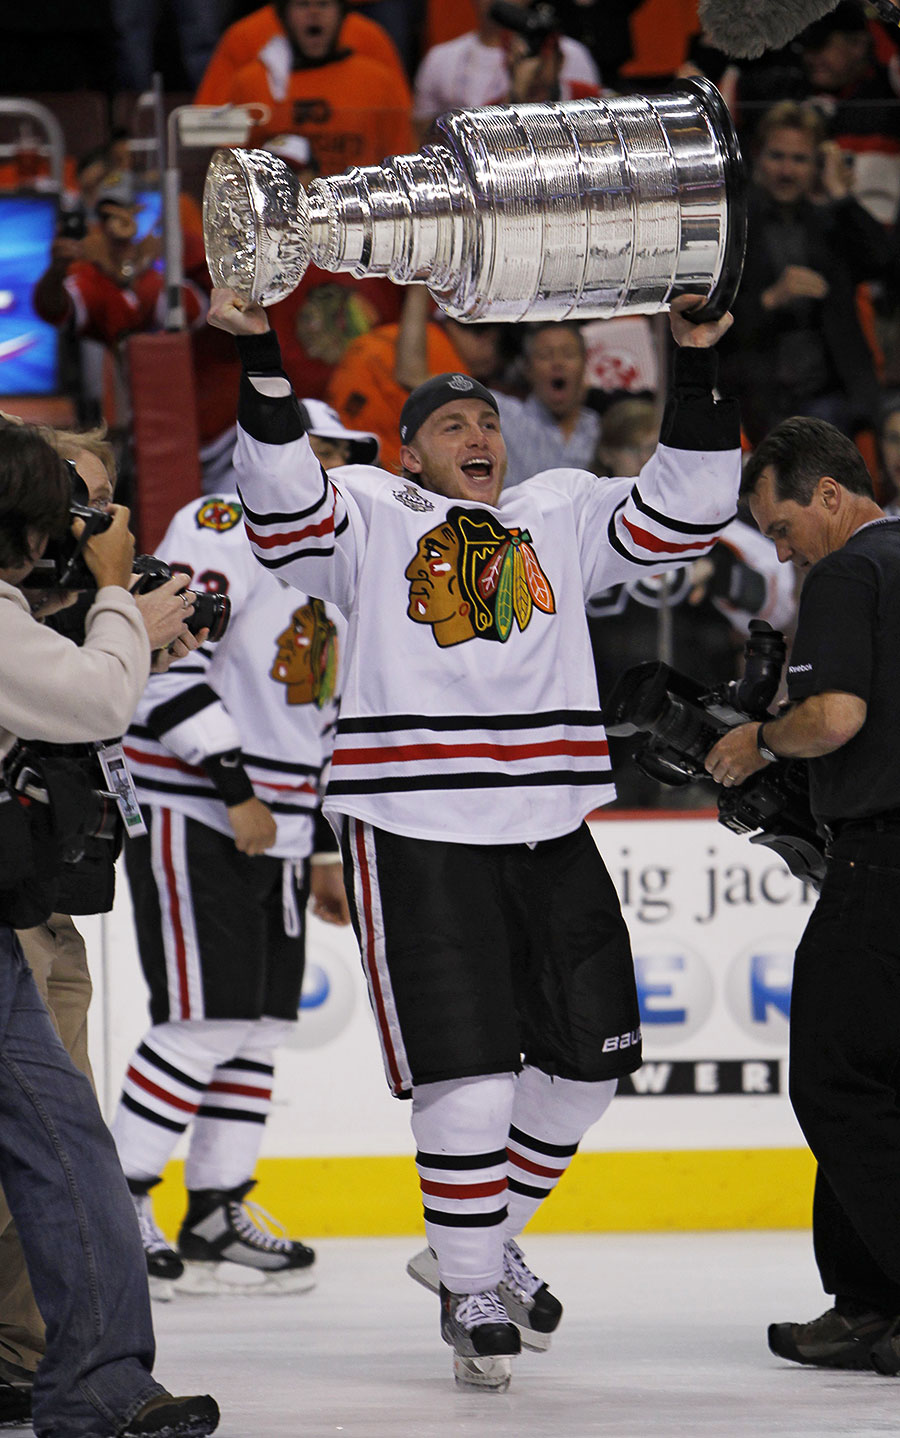 The Blackhawks win the Stanley Cup